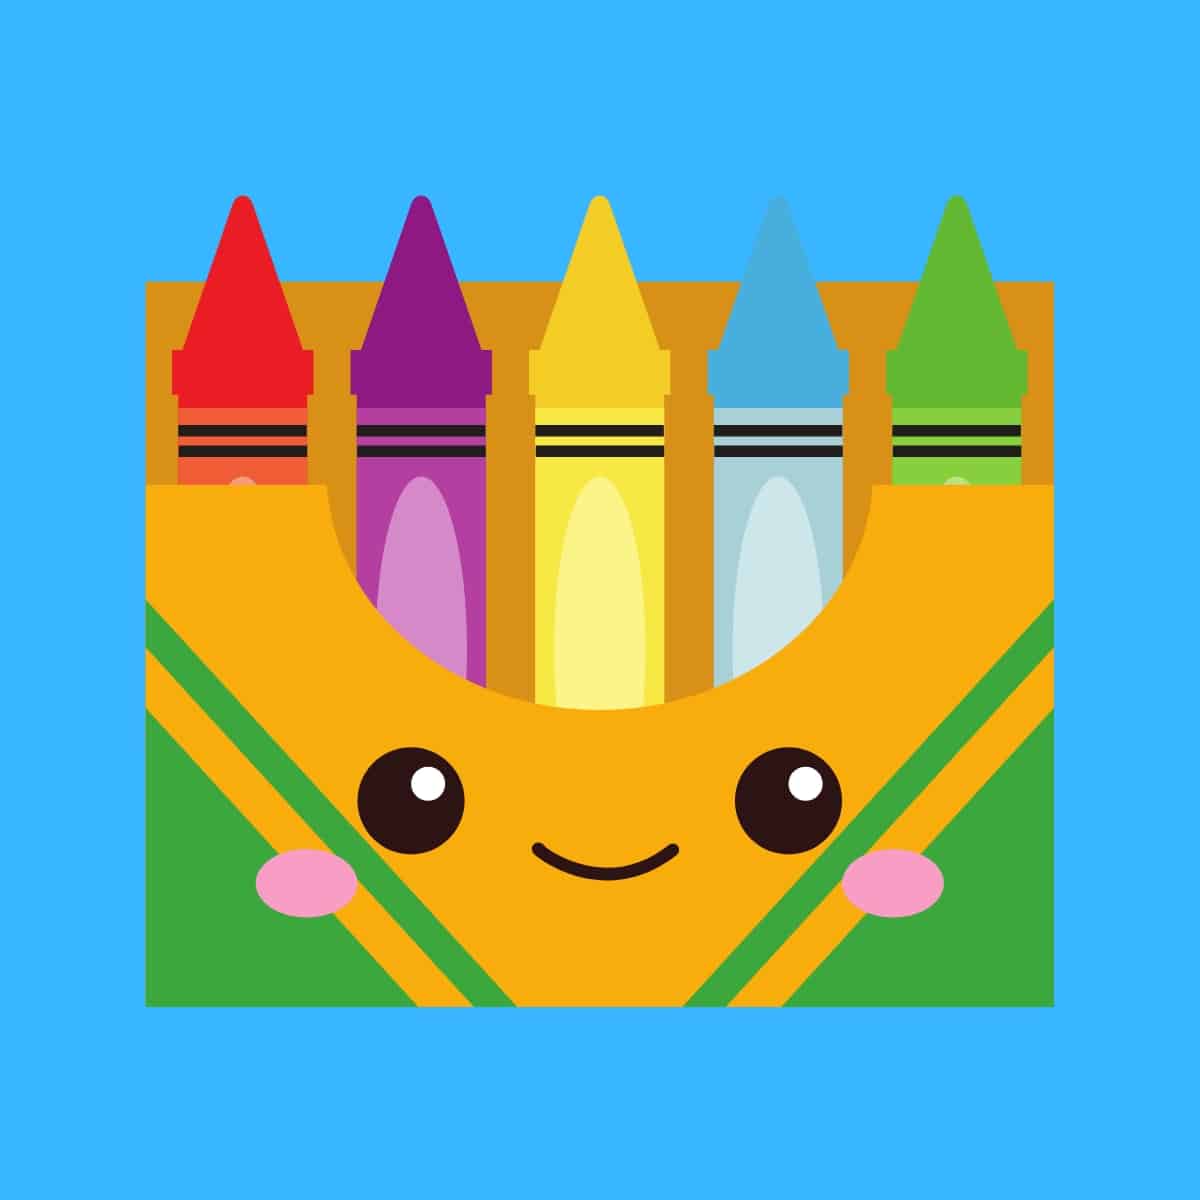 Cartoon graphic of a smiling box of crayons on a blue background.